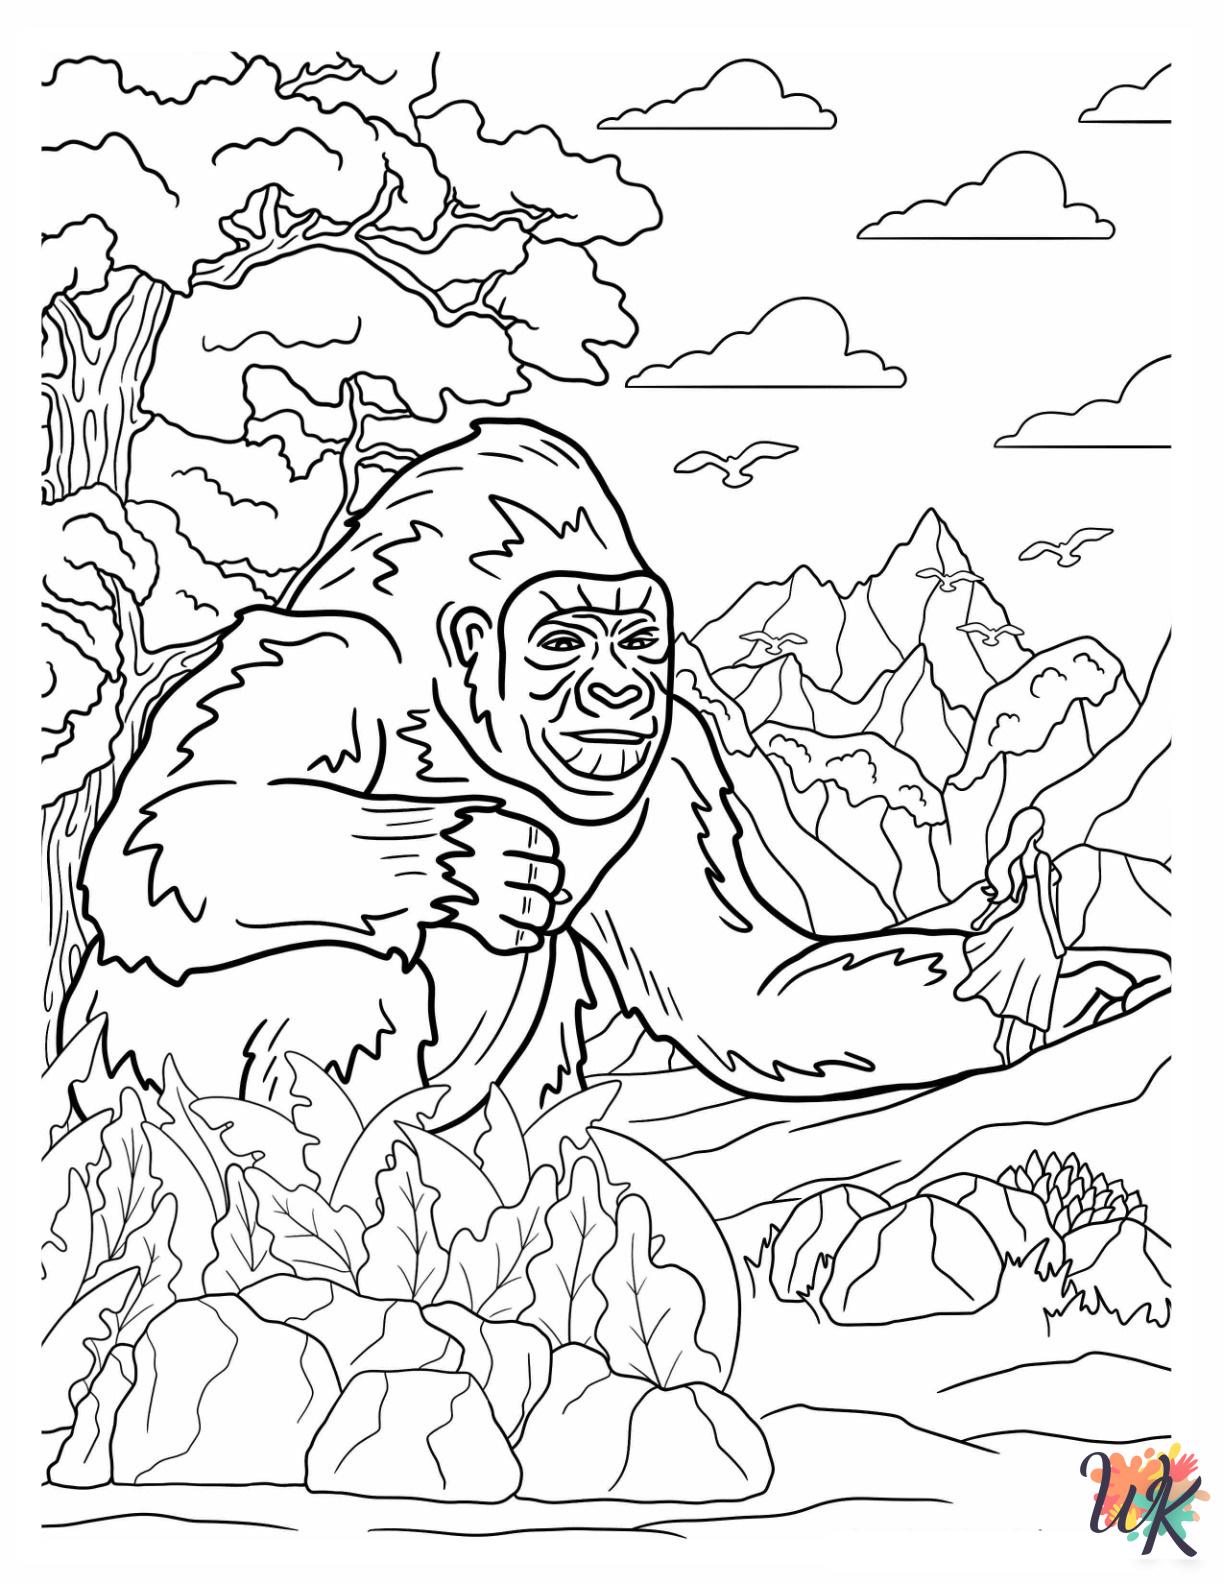 King Kong coloring pages grinch